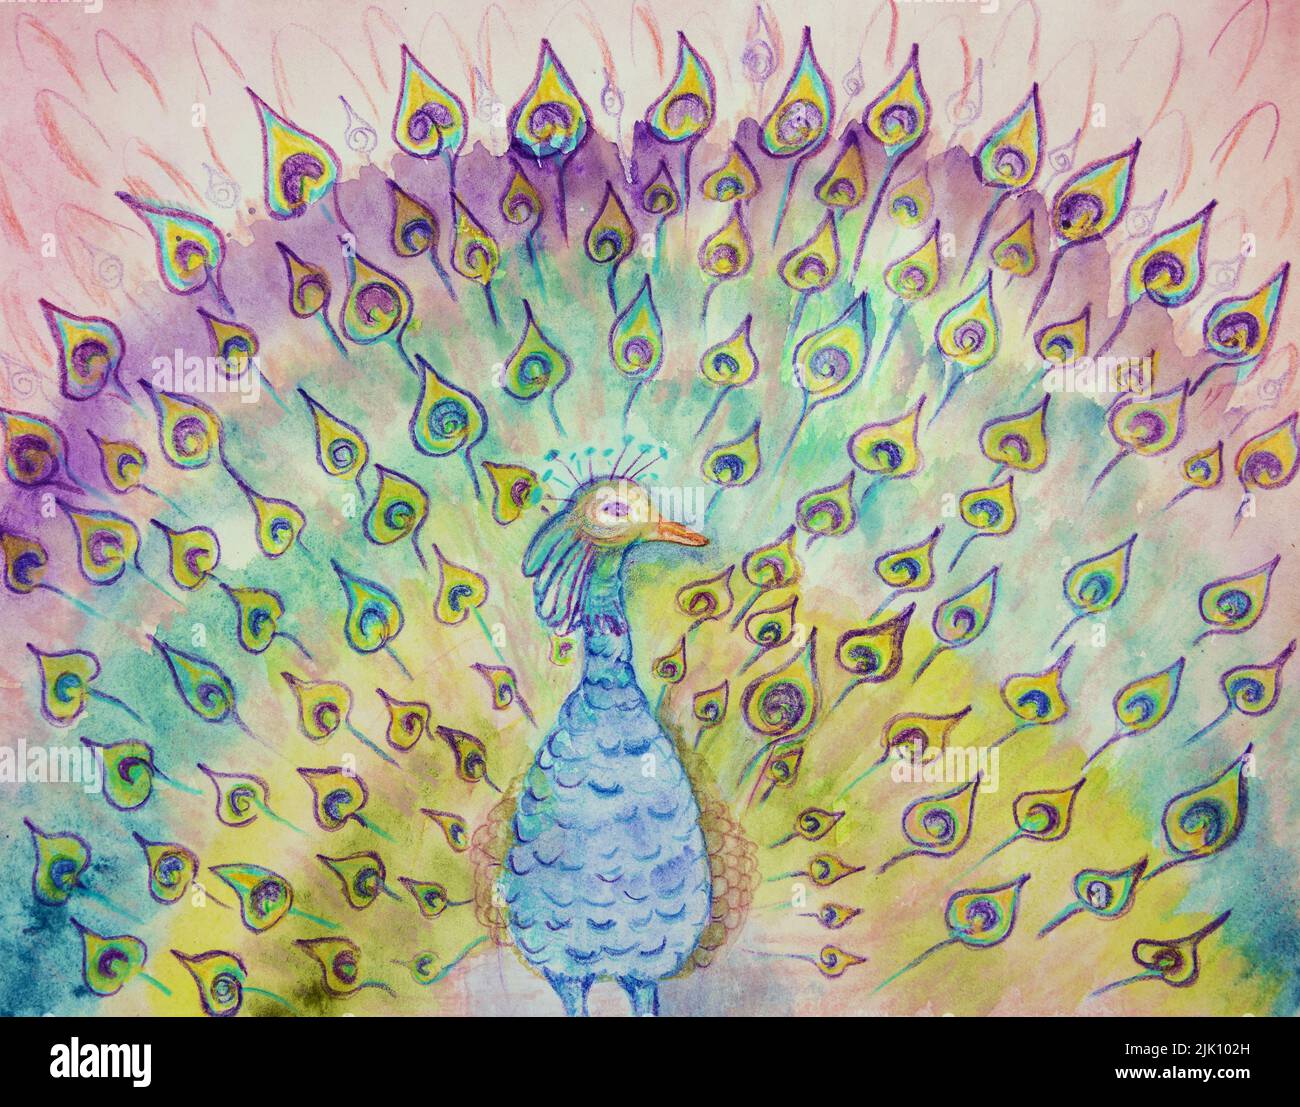 Blue peacock with a lot of whimsical feathers. The dabbing technique near the edges gives a soft focus effect due to the altered surface roughness of Stock Photo